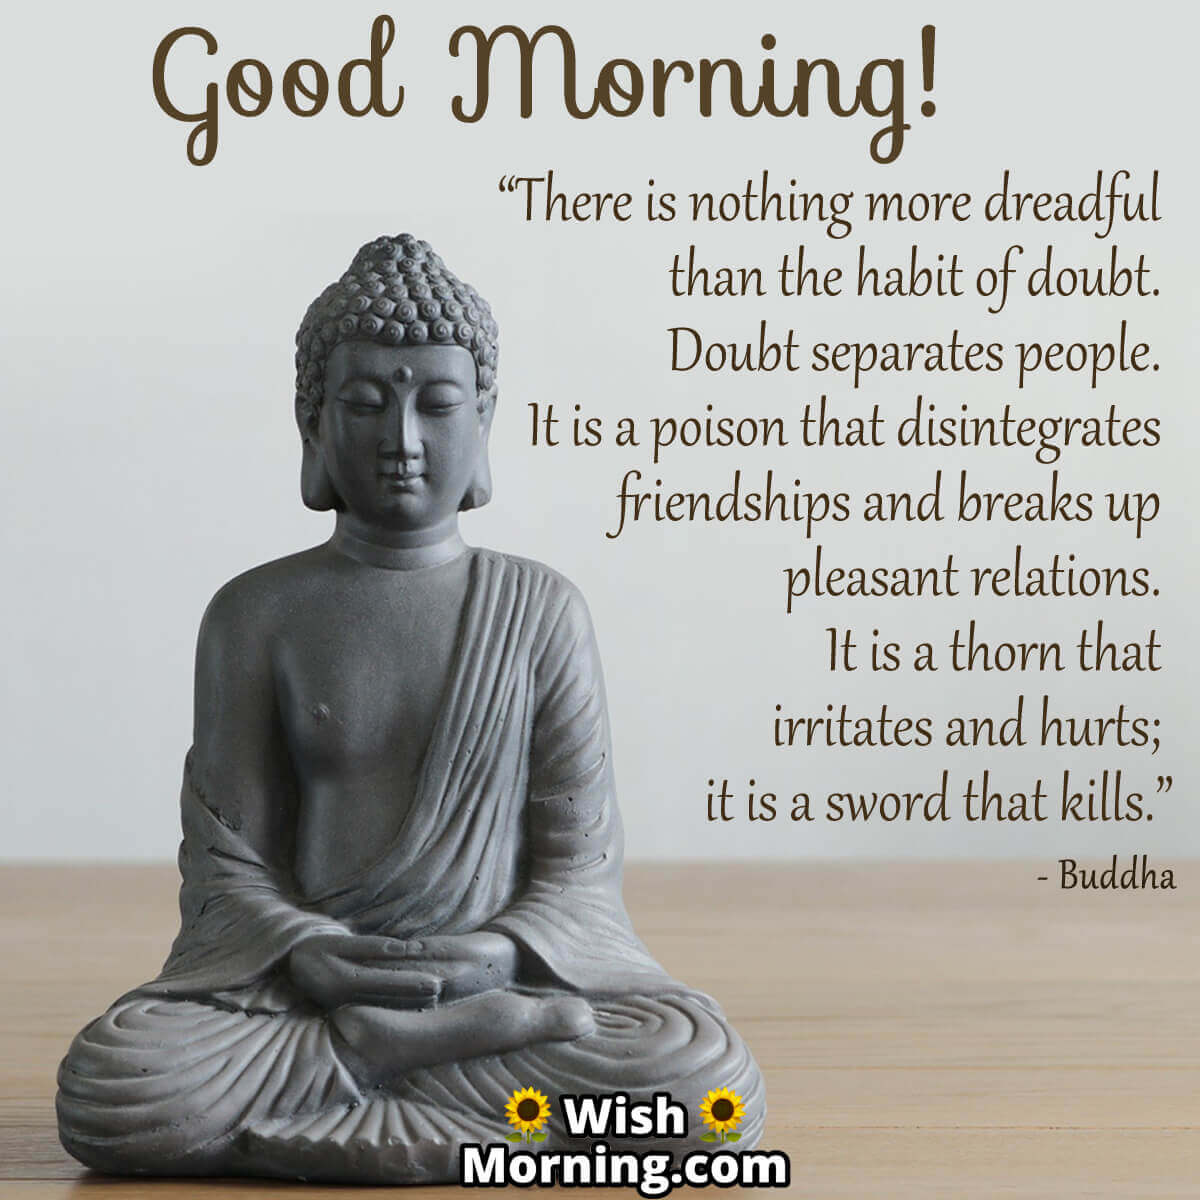 Good Morning Buddha Pictures